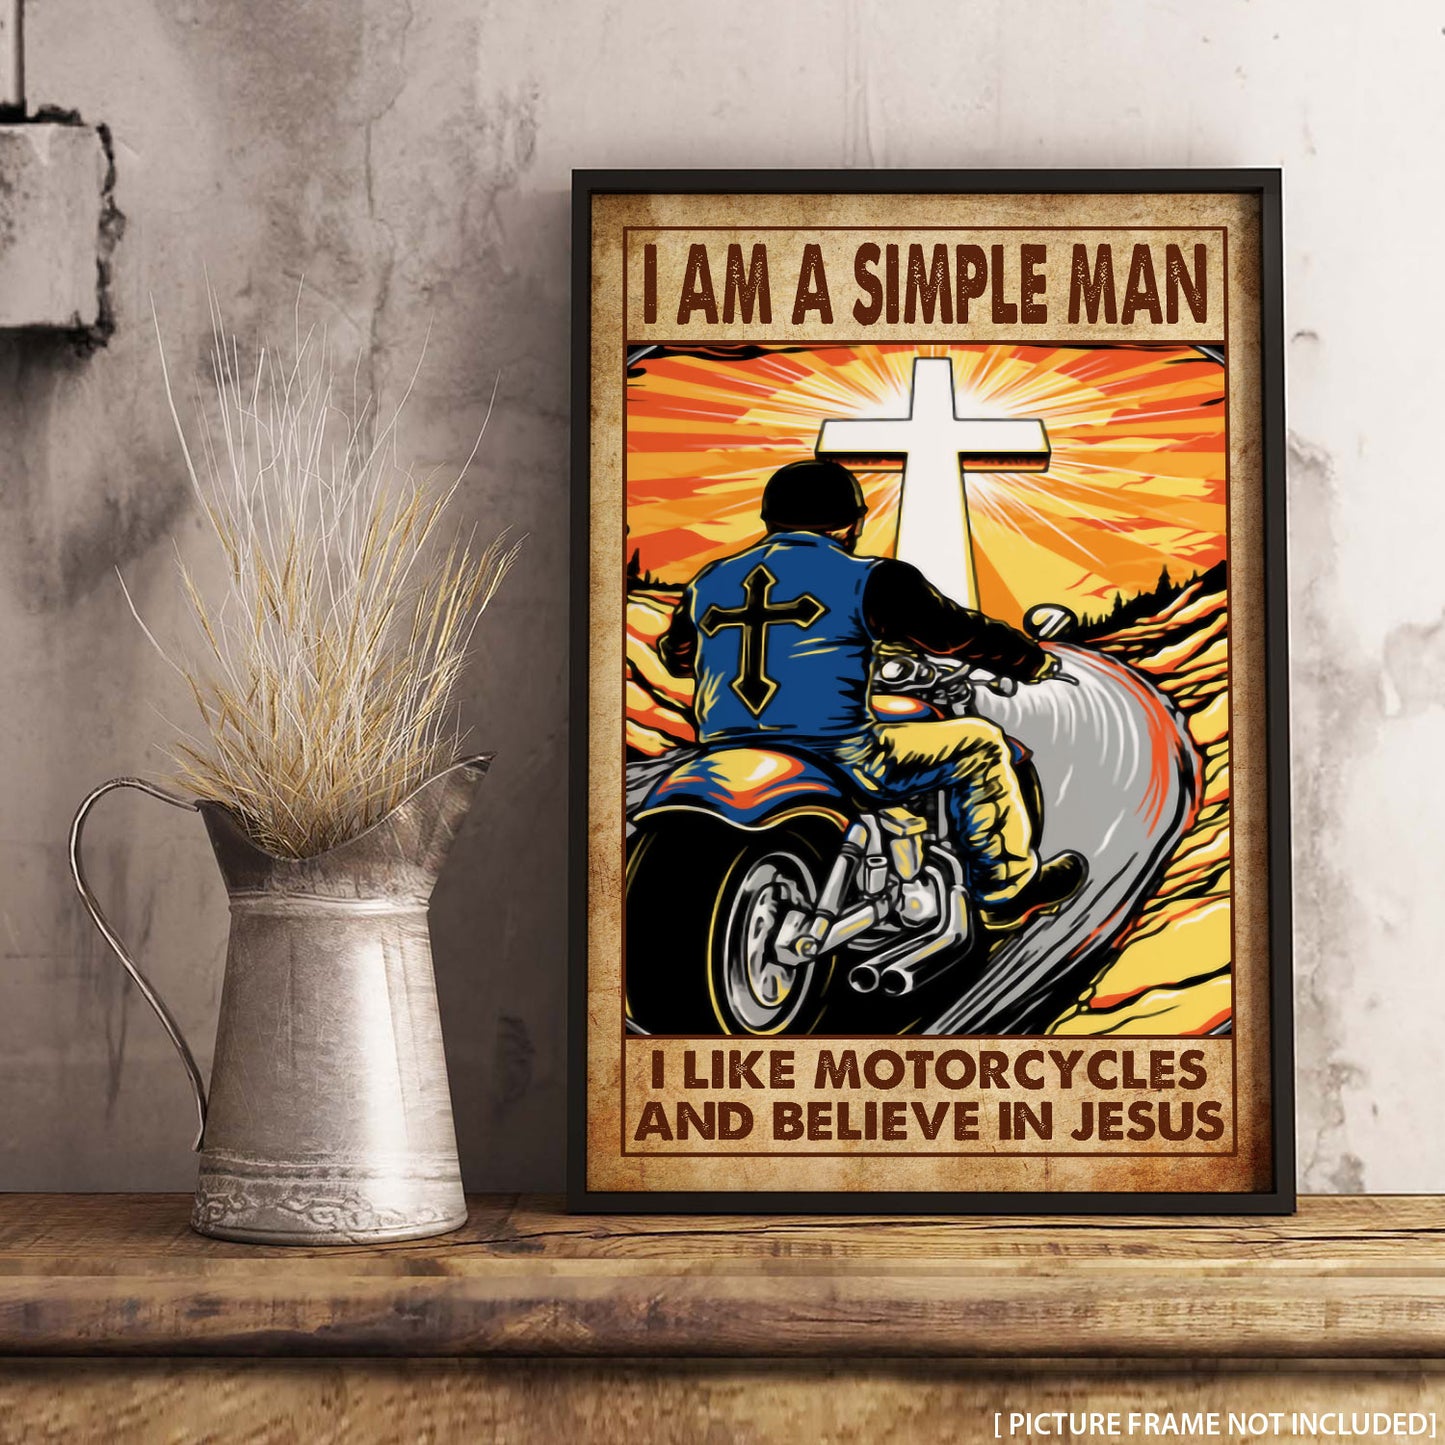 Wanderlust I Am A Simple Man Jesus Personalizedwitch Poster